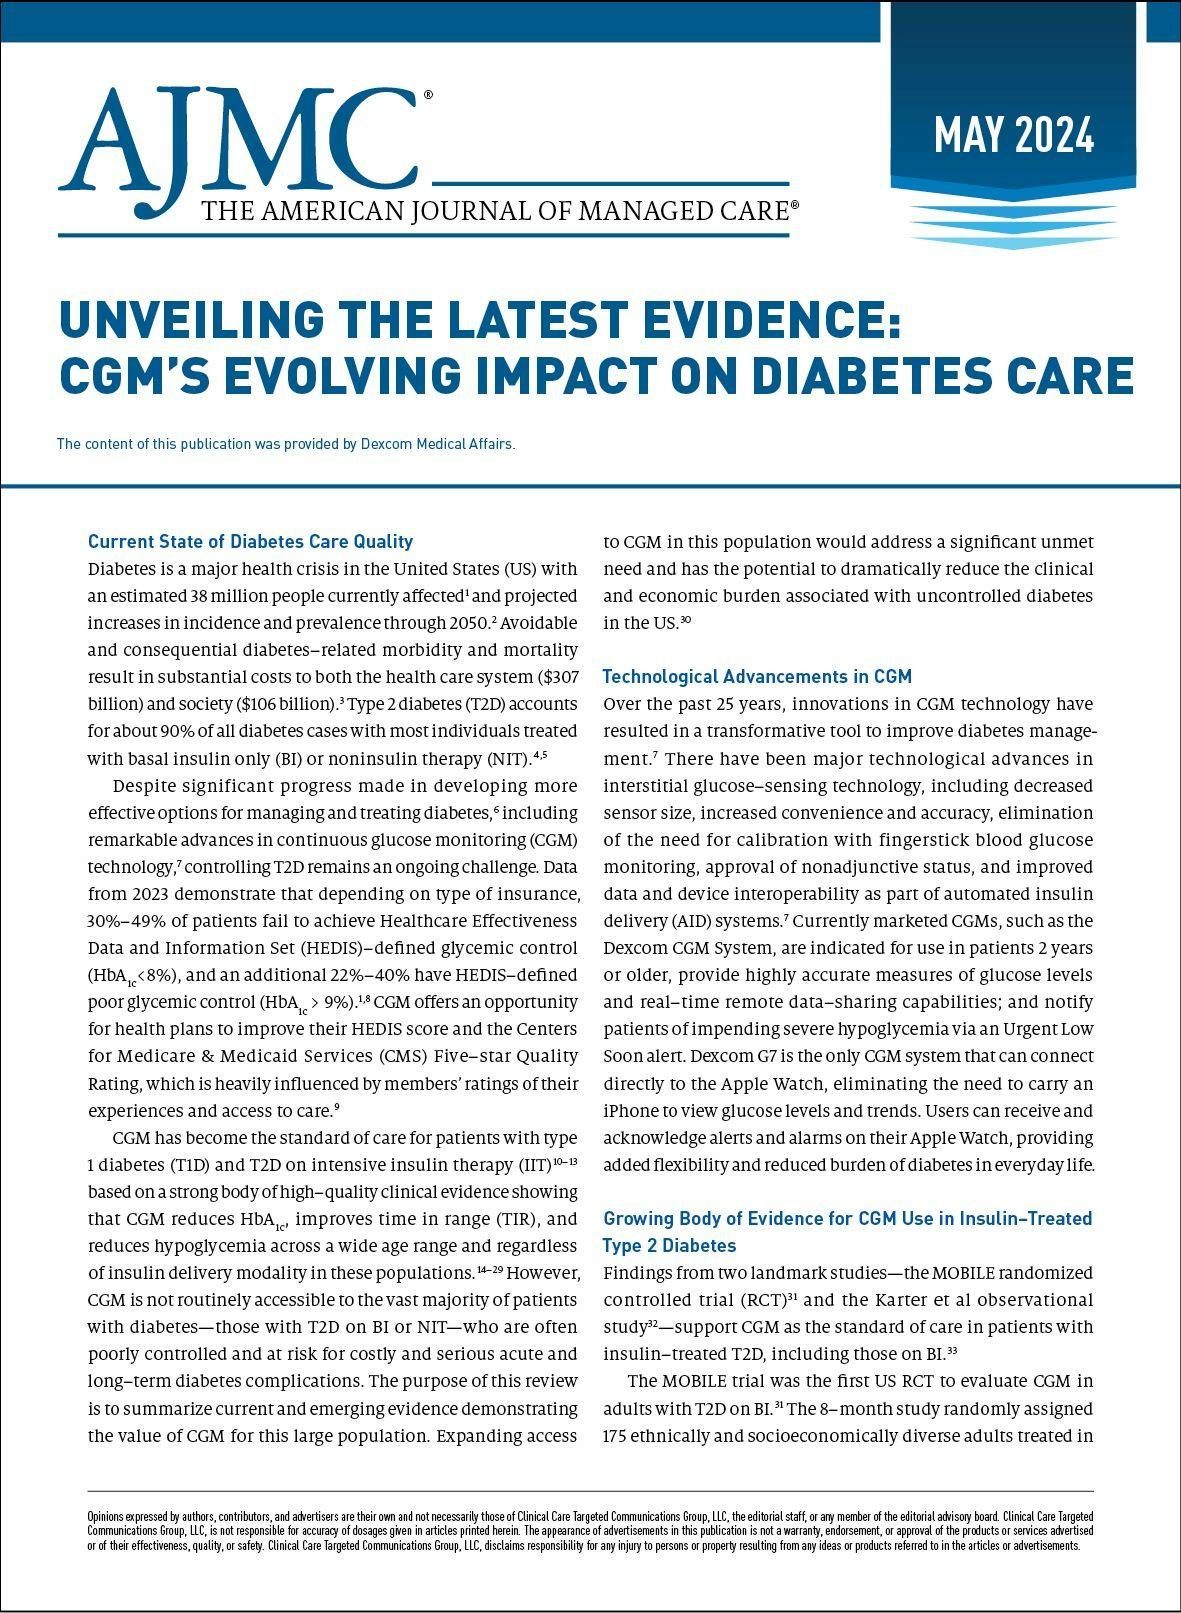 Unveiling the Latest Evidence: CGM’s Evolving Impact on Diabetes Care